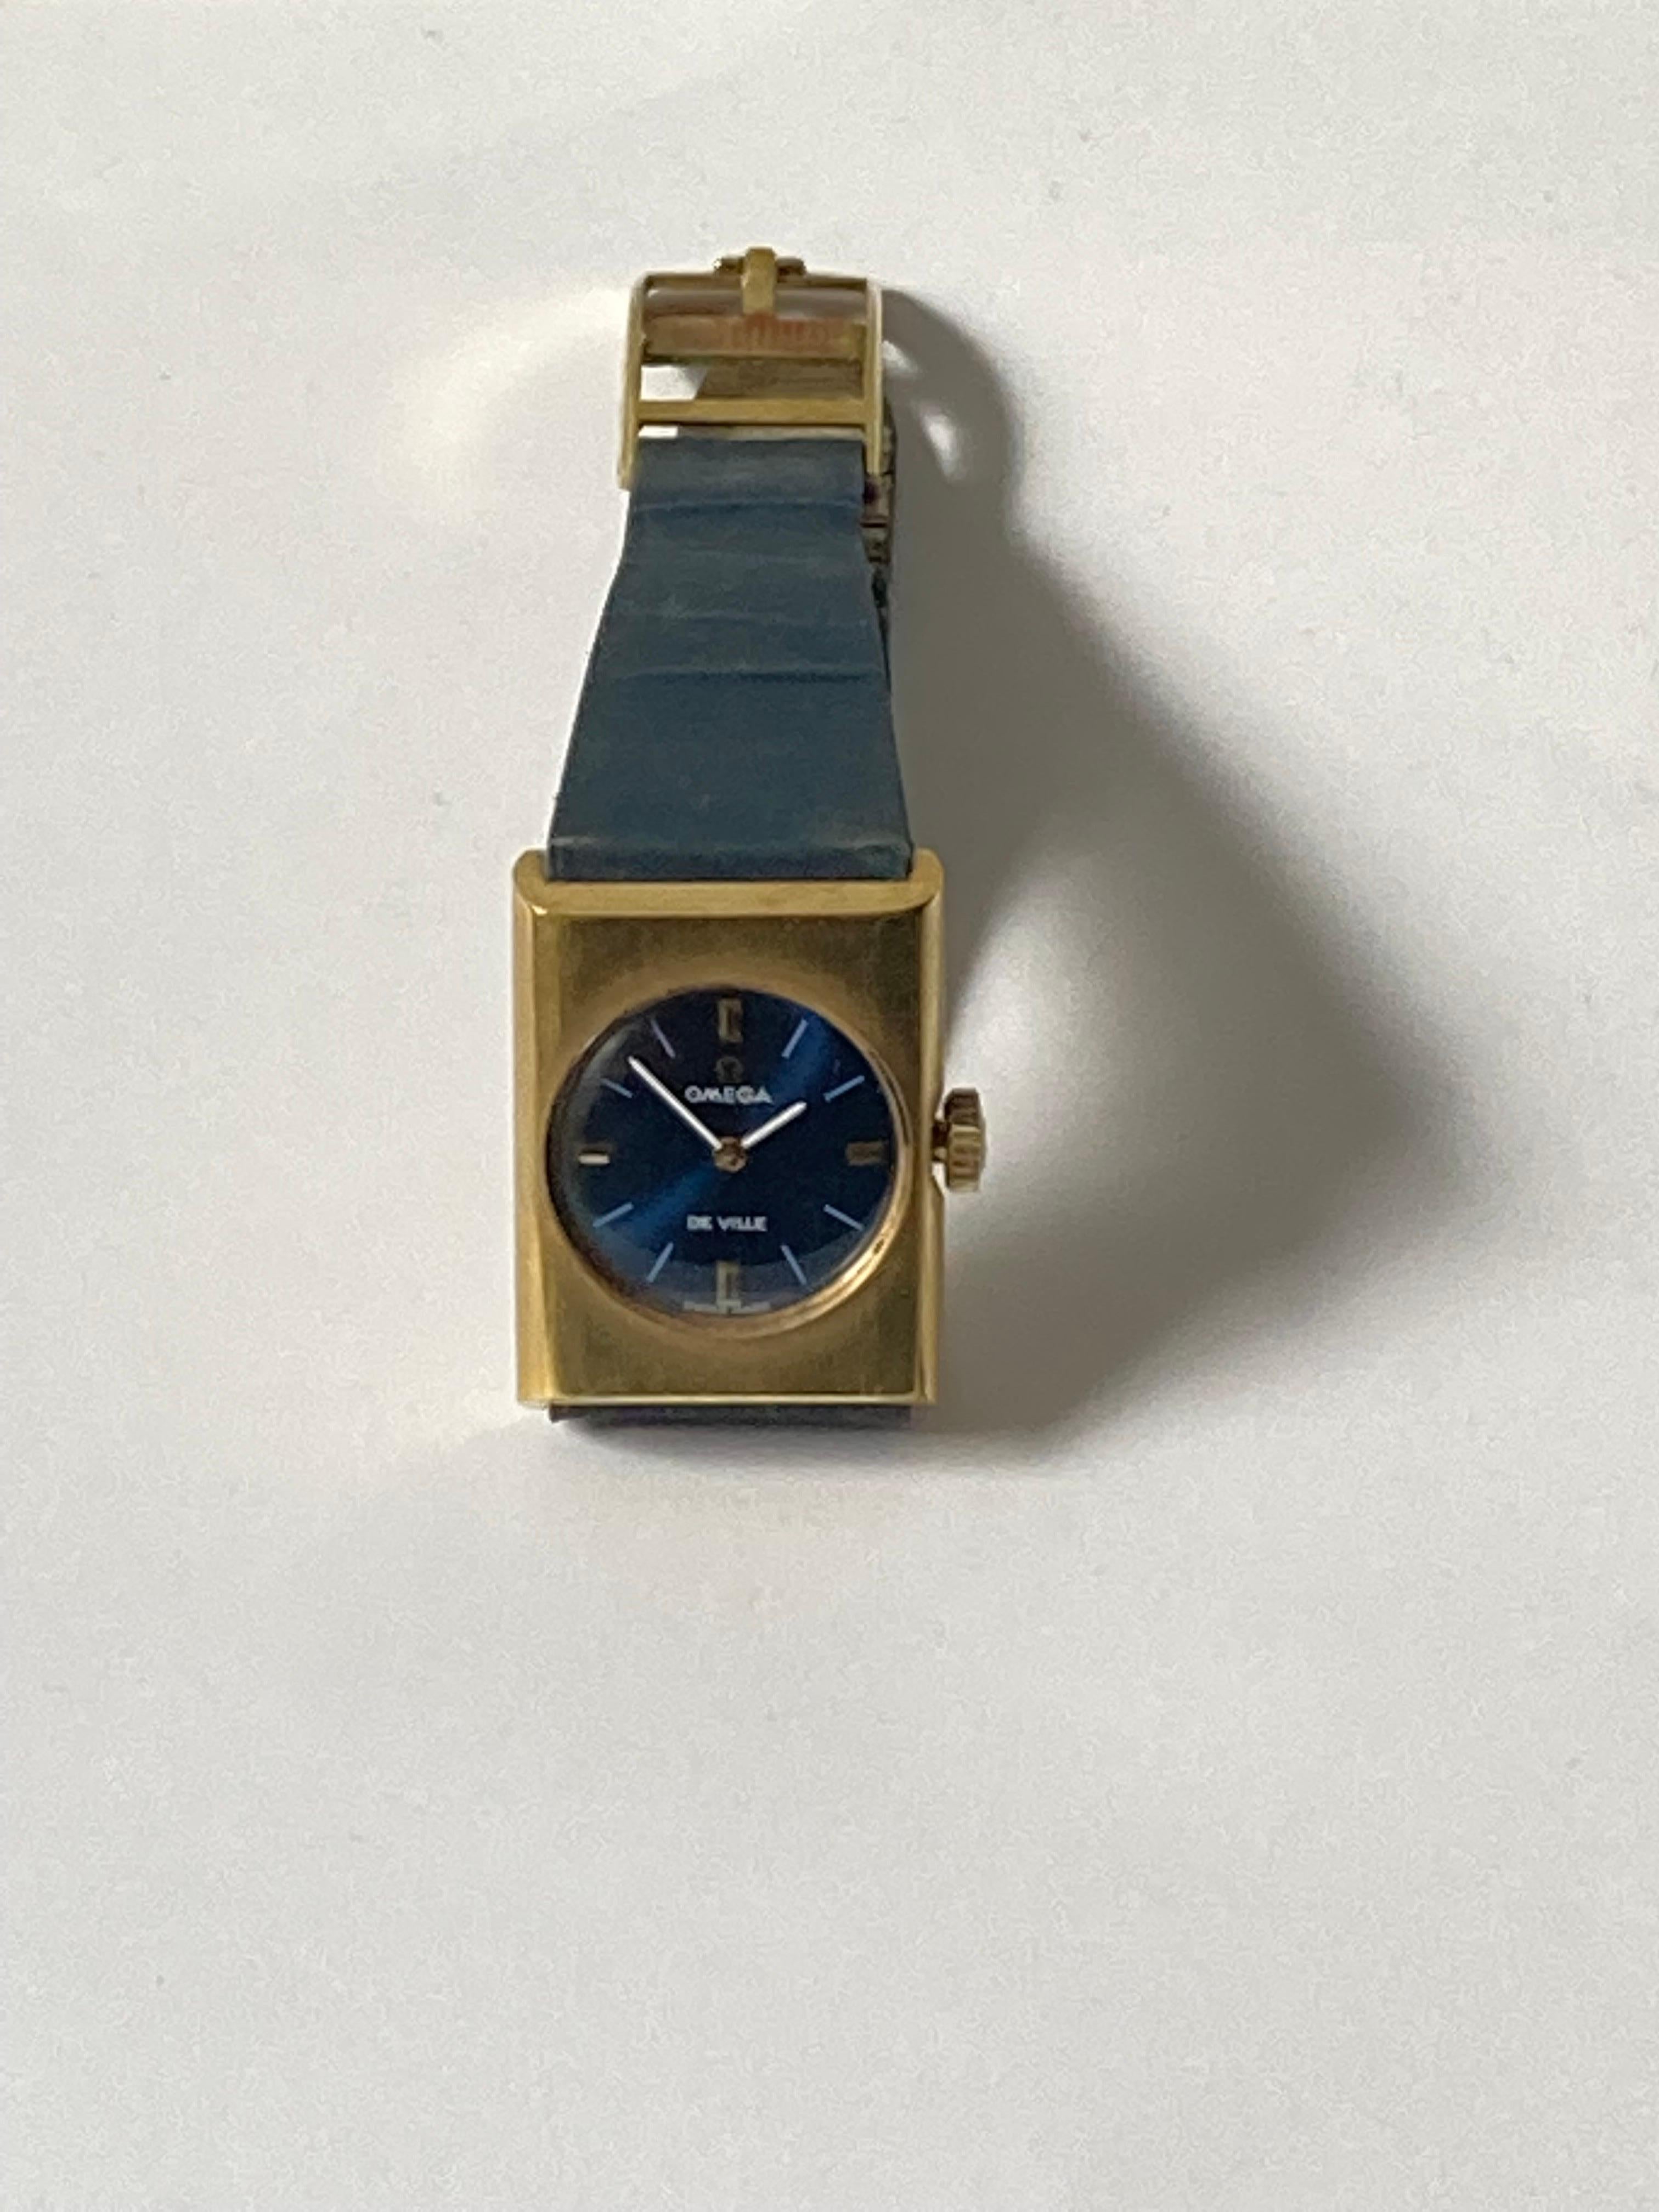 1969 Omega De Ville mechanical watch, with deep blue sea dial, 18K gold plated watch case, original strap and applied hour markers at the cardinal positions 3,6,9 & 12.

The watch is free of Seamaster branding, which is a hint as to its